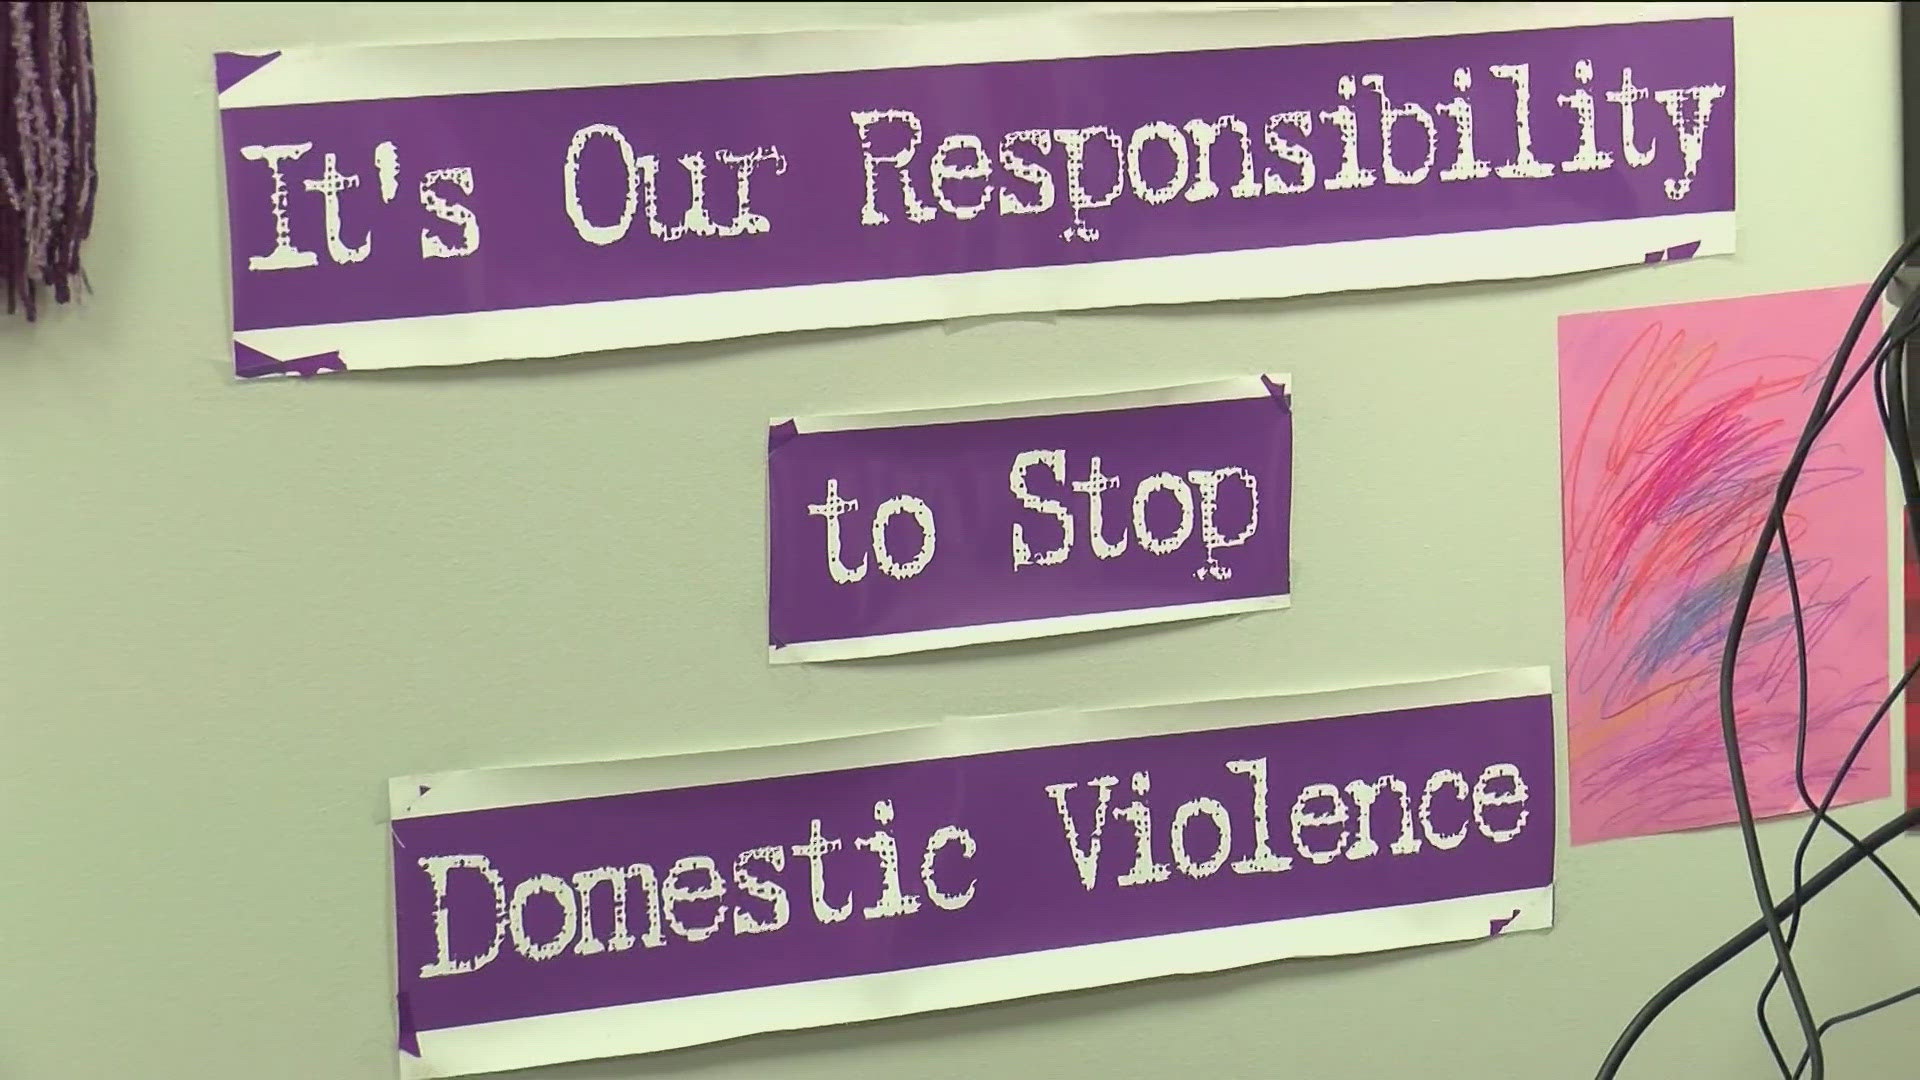 Advocates say the bill will open doors for survivors of sexual violence. It awaits Gov. Mike DeWine's signature to become law.